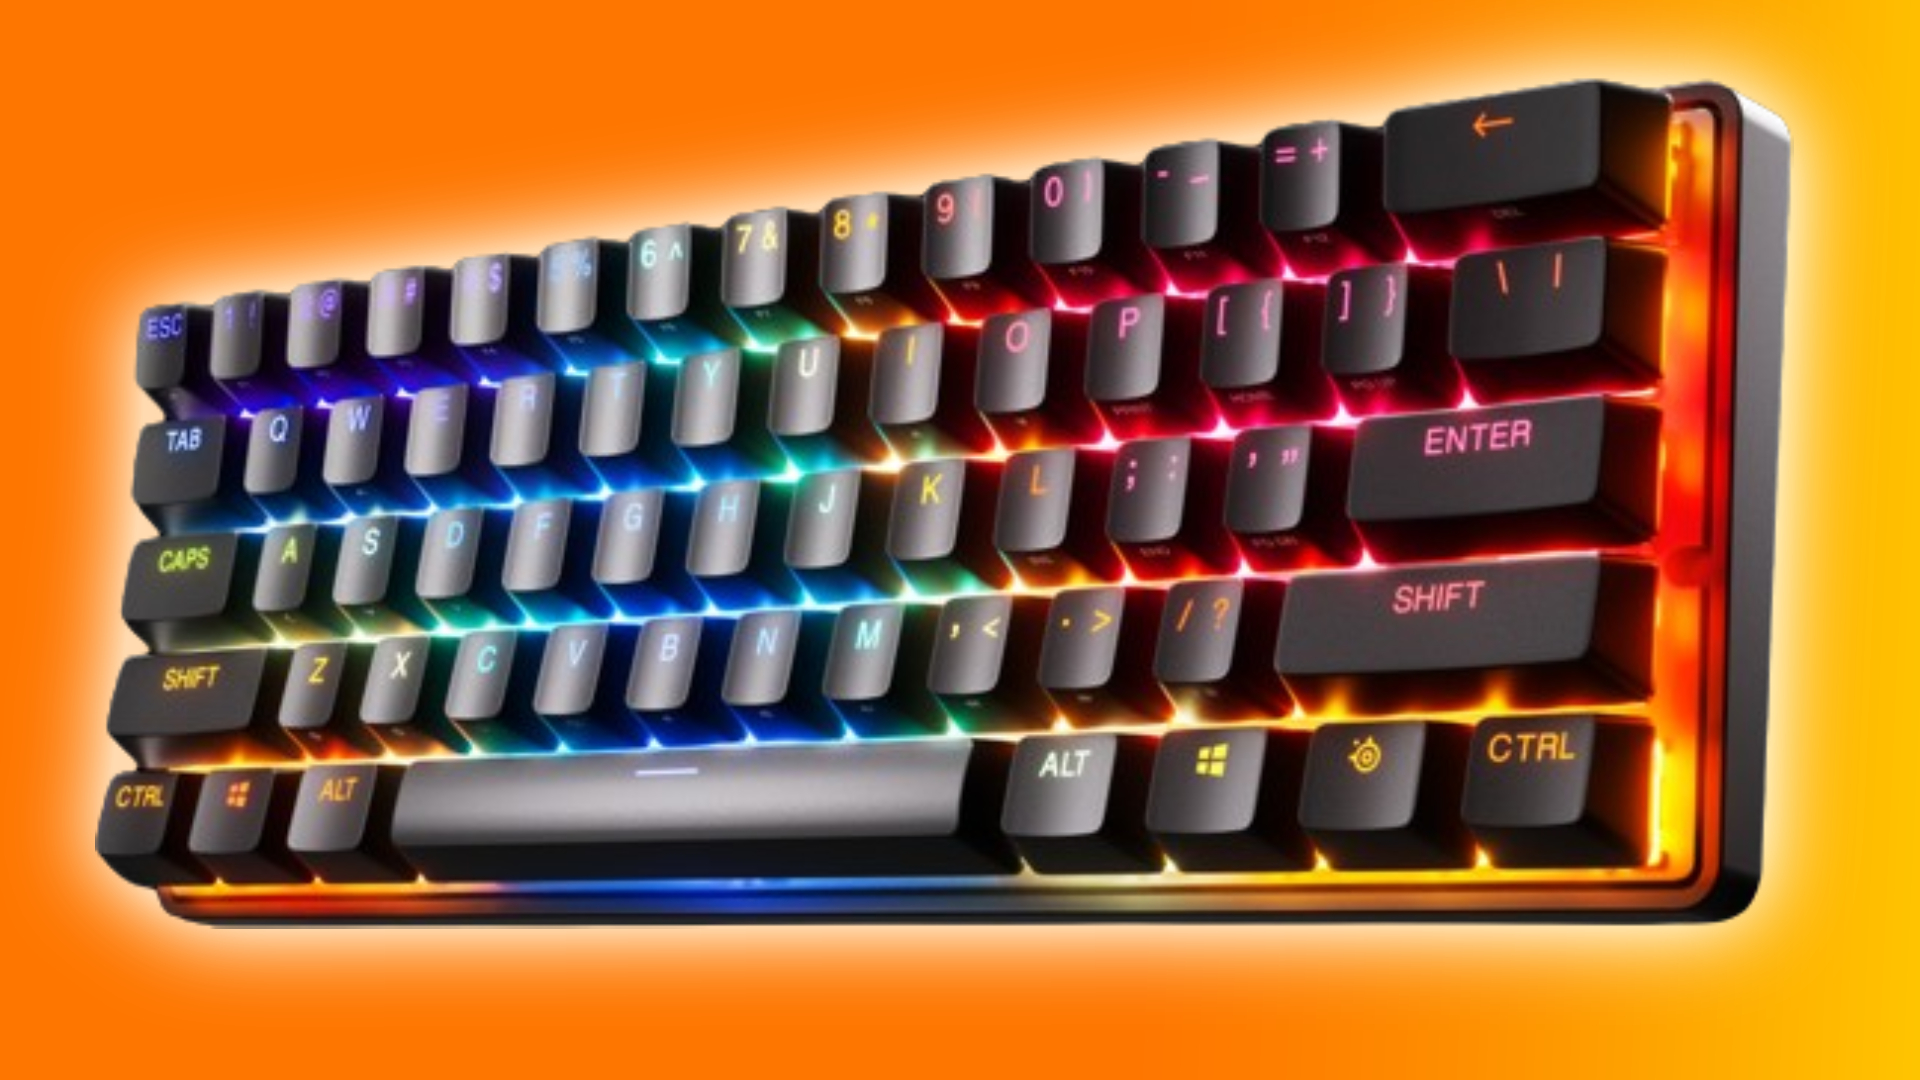 The Steelseries Apex Pro Mini gaming keyboard is now less than $160